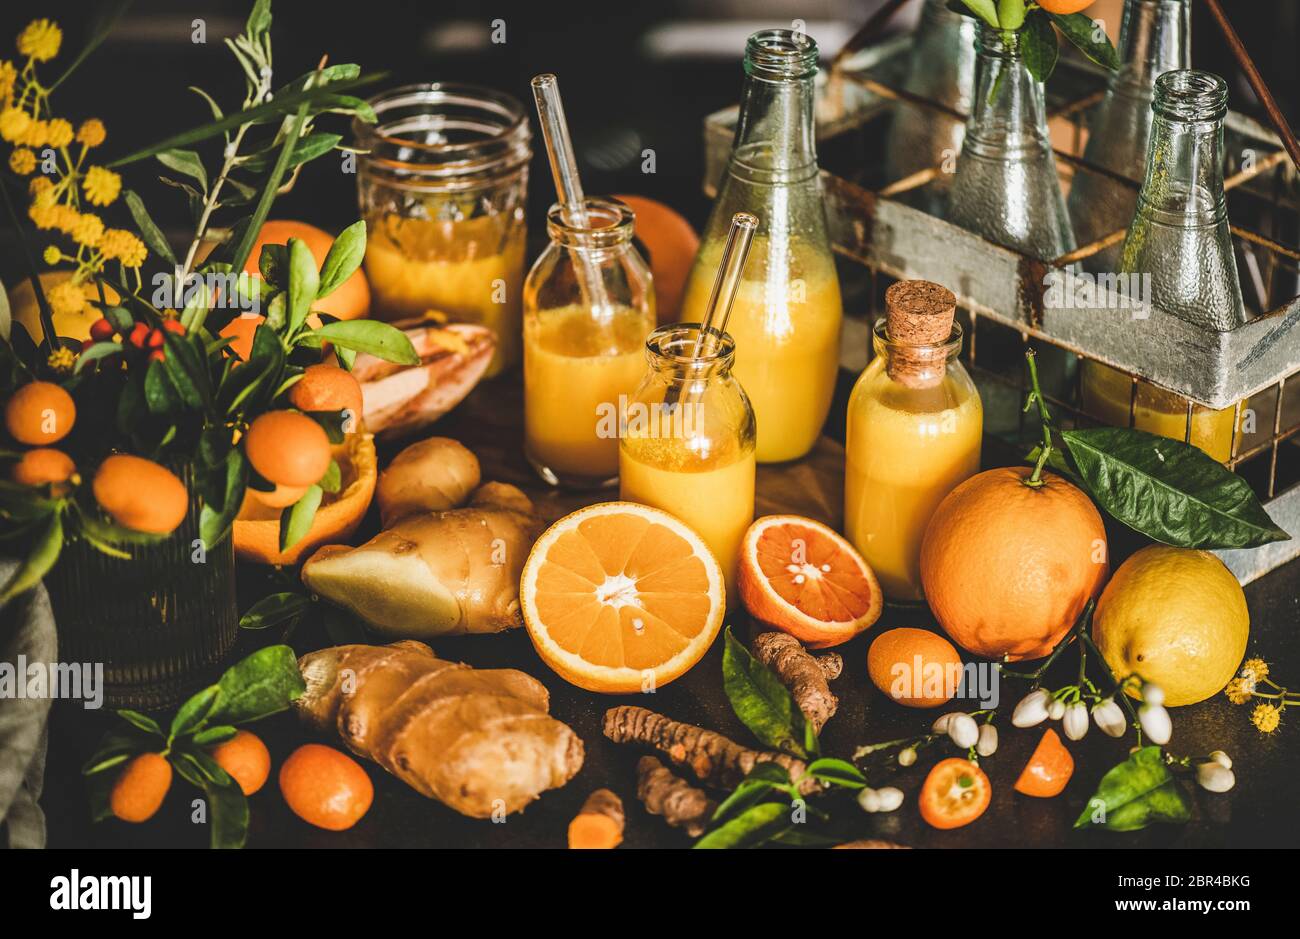 Immune boosting vitamin health defending drink. Turmeric, ginger and citrus juice shots in bottles and fresh ingredients over concrete kitchen counter Stock Photo